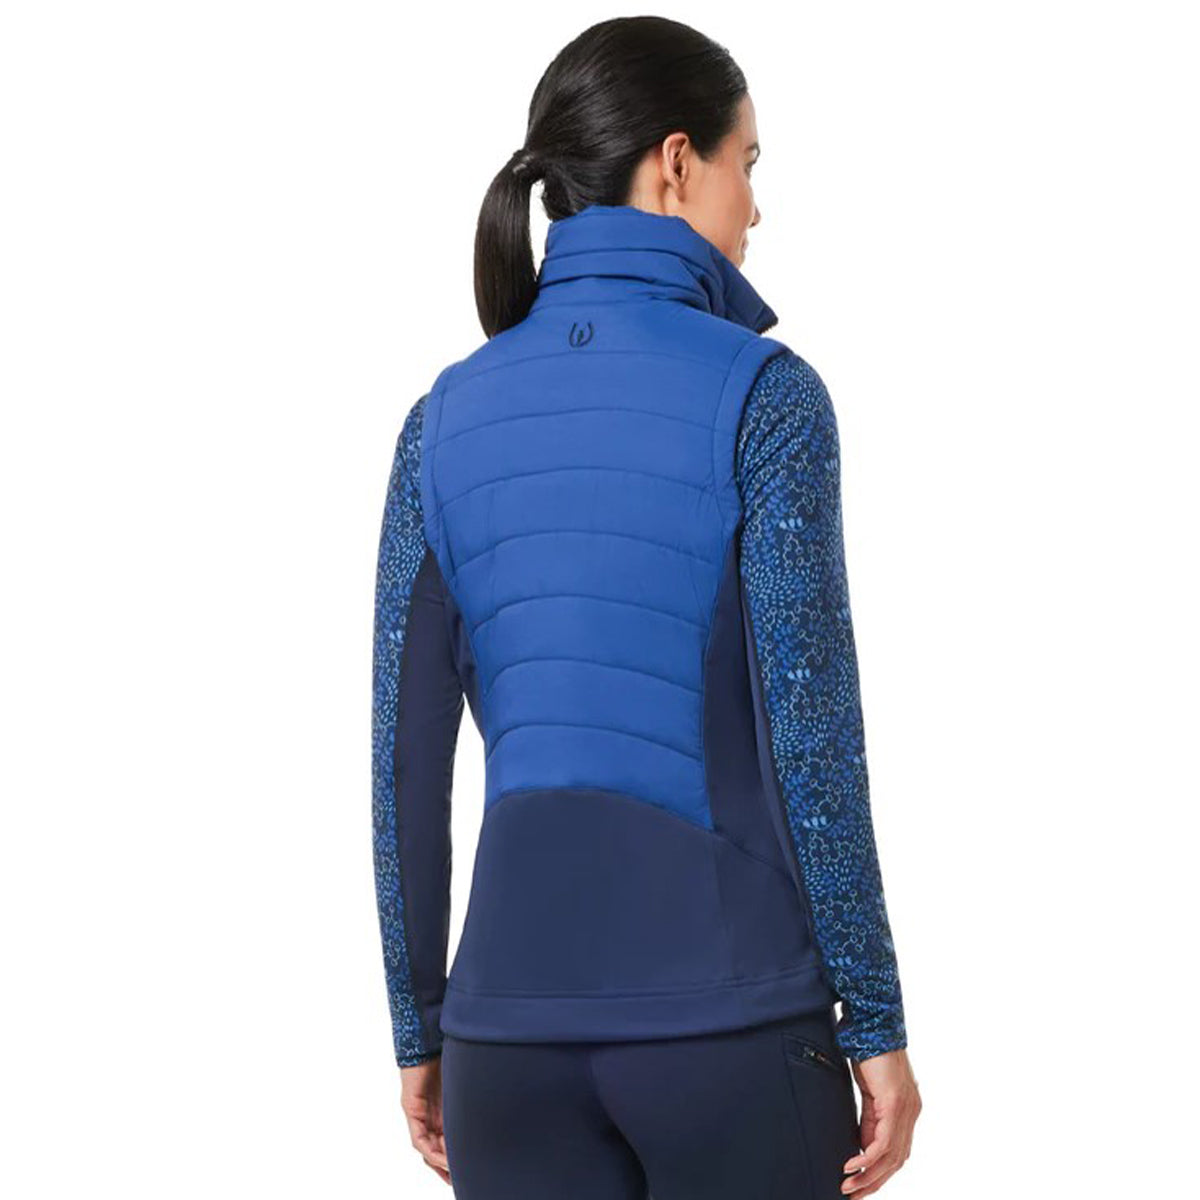 Kerrits Women's Full Motion Quilted Vest - Solid-Sale